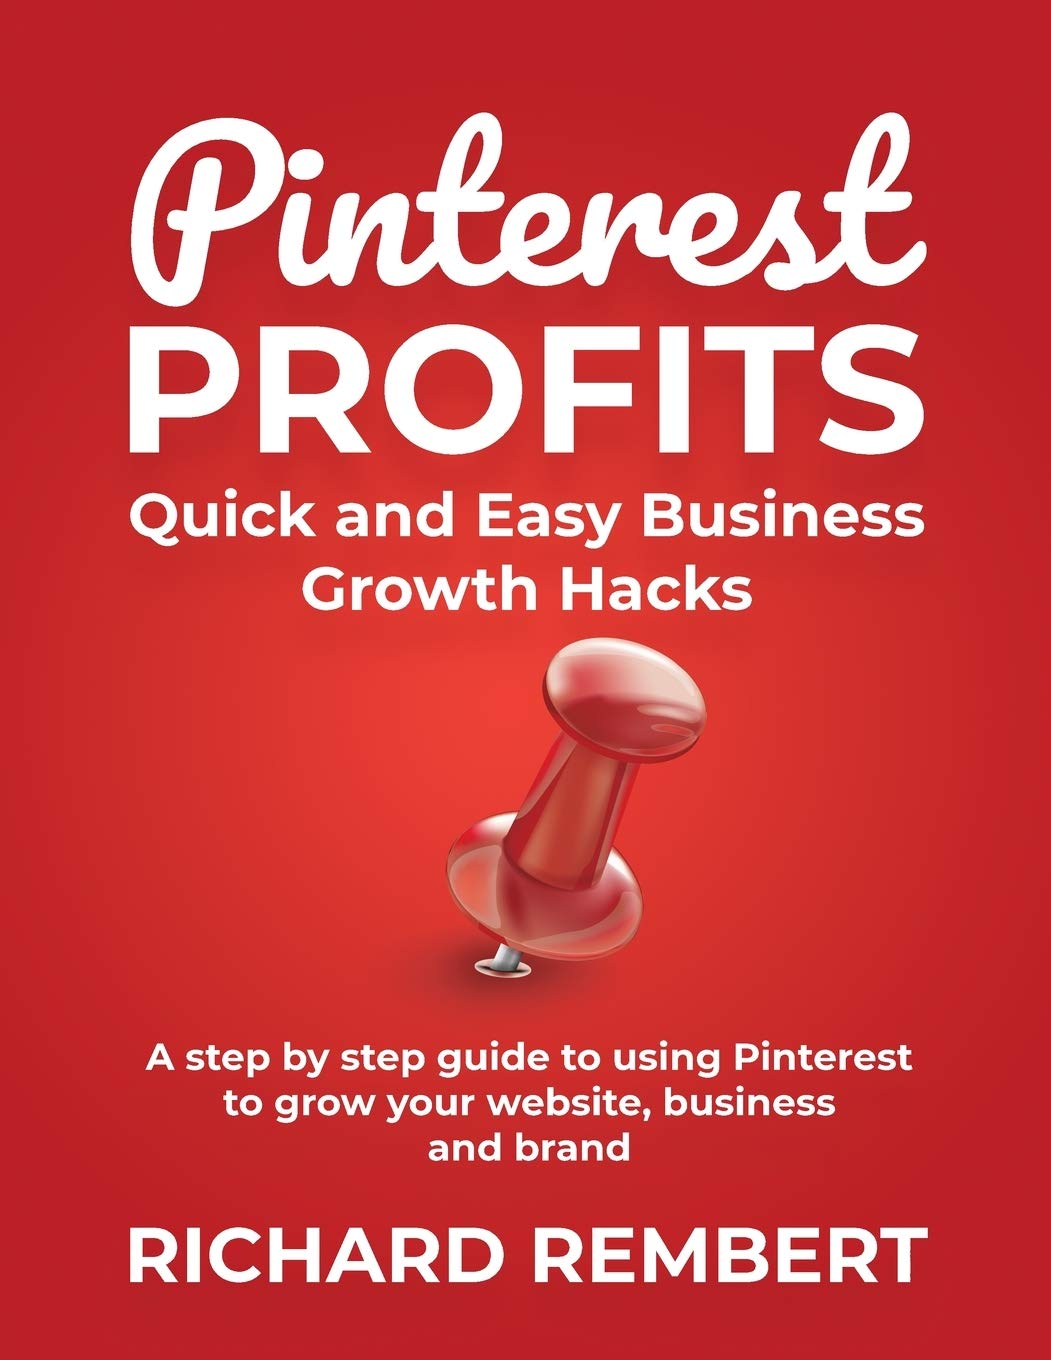 Pinterest Profits: Quick and Easy Business Growth Hacks